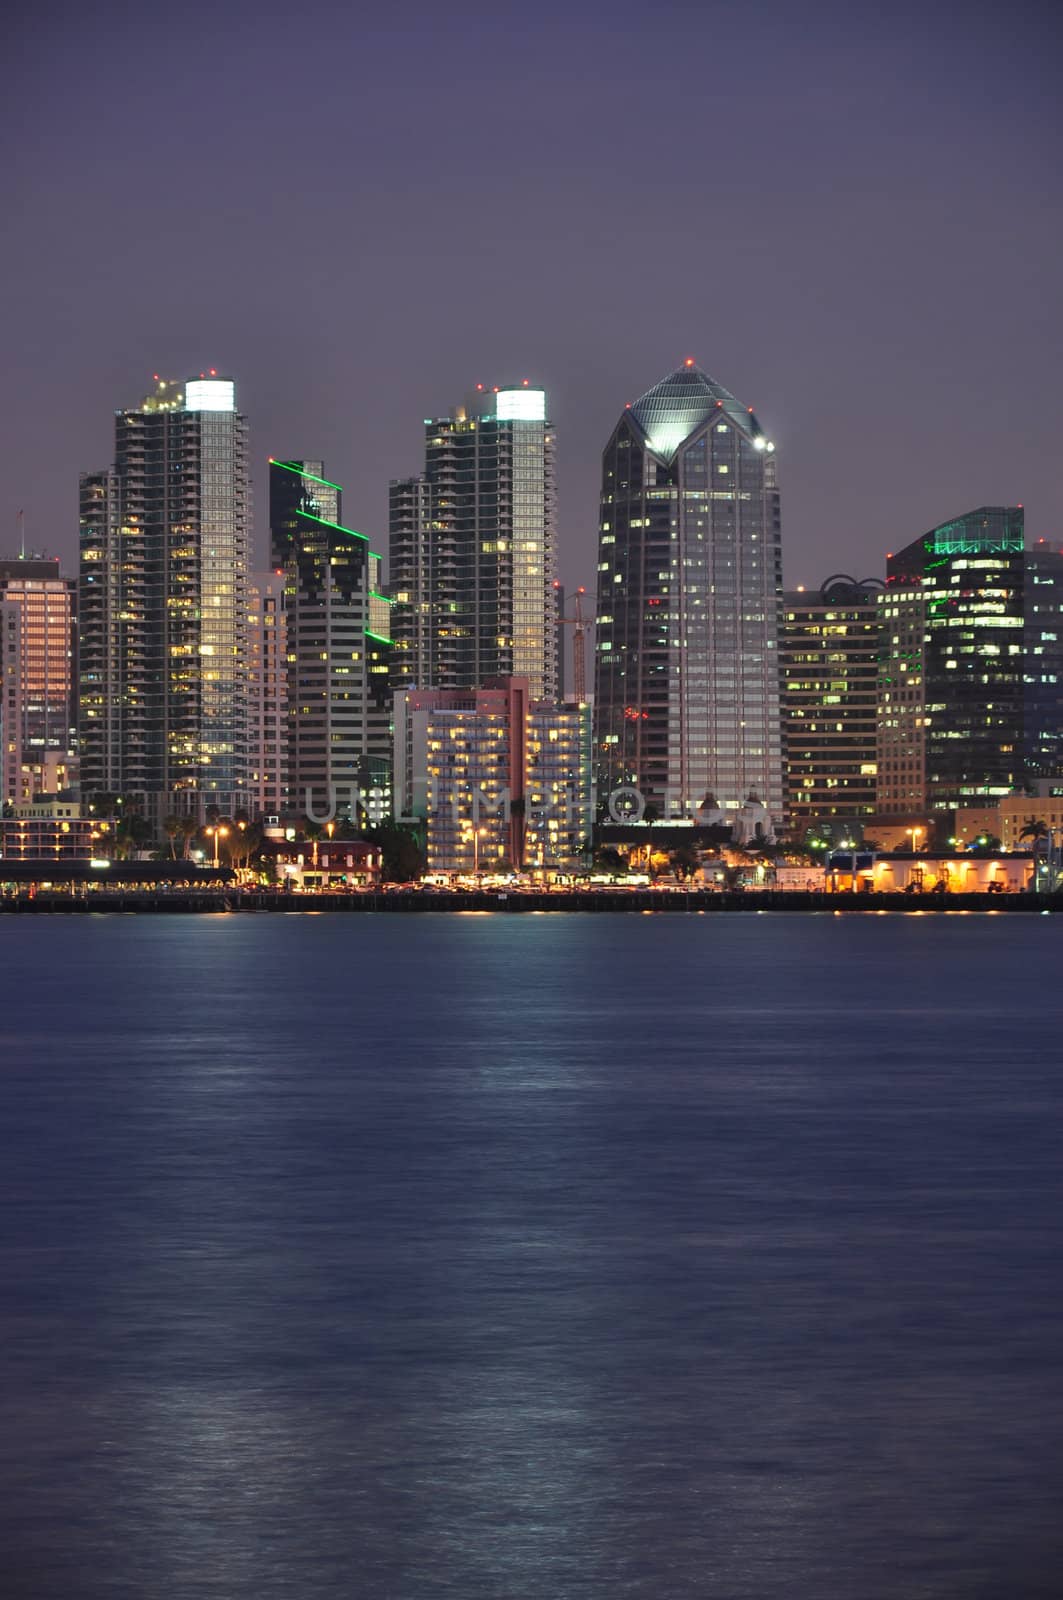 View of some tall office towers at night which line the waterfront in San Diego, California.